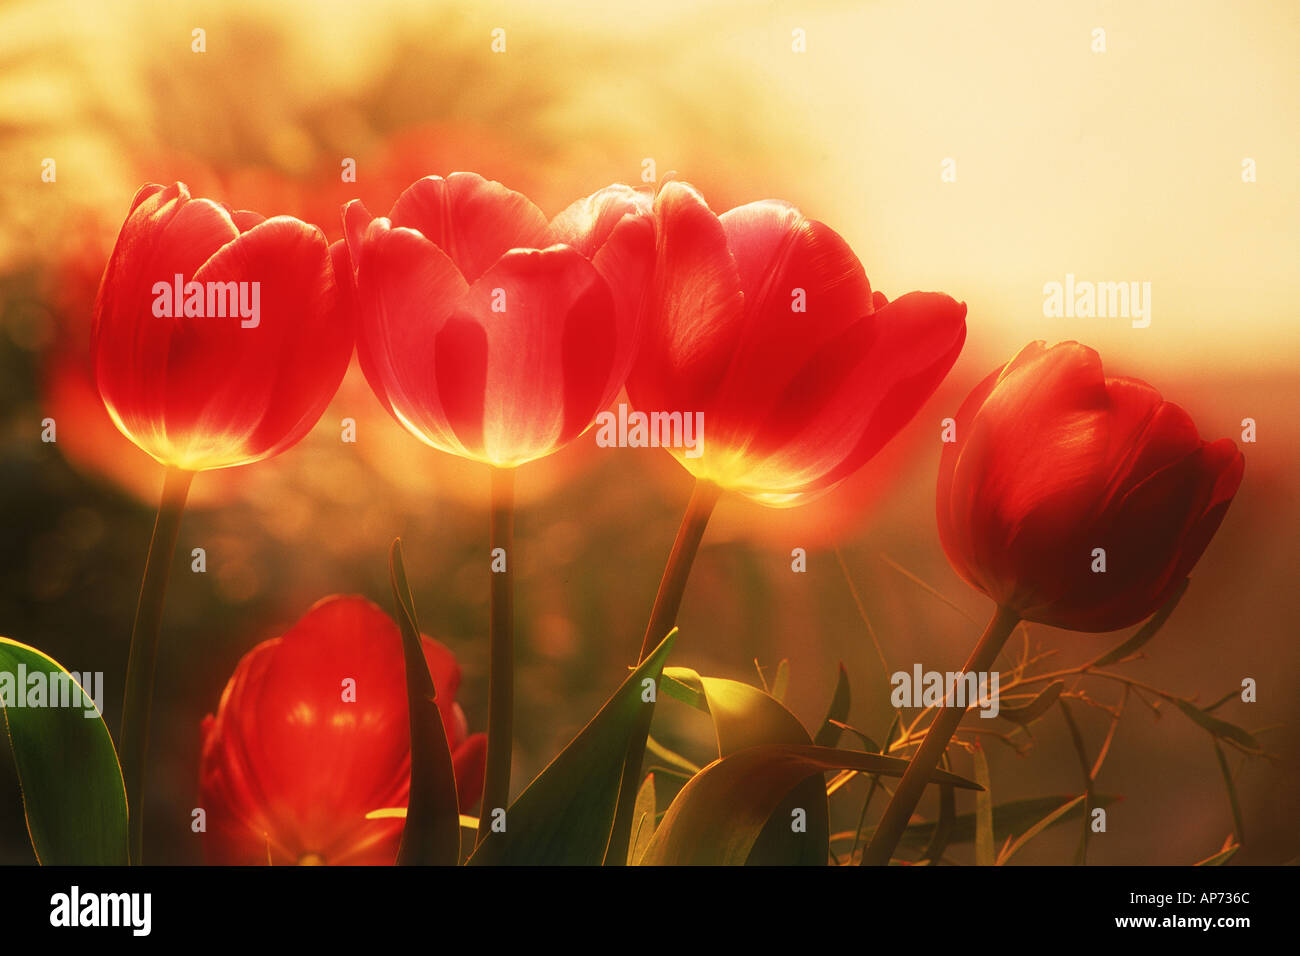 Red tulips in sunset light Stock Photo